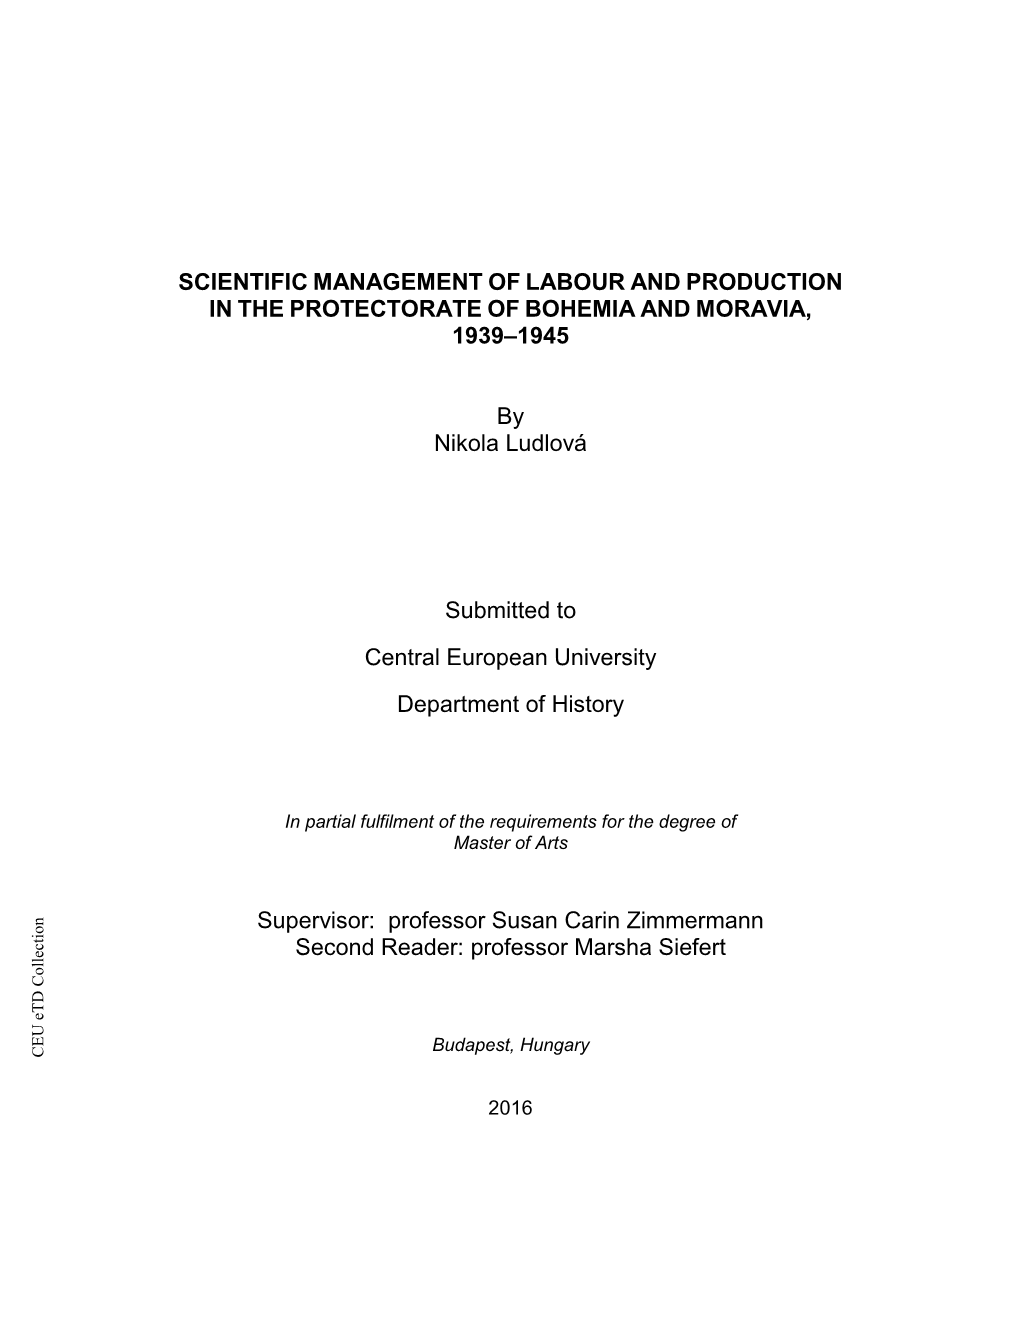 Scientific Management of Labour and Production in the Protectorate of Bohemia and Moravia, 1939–1945